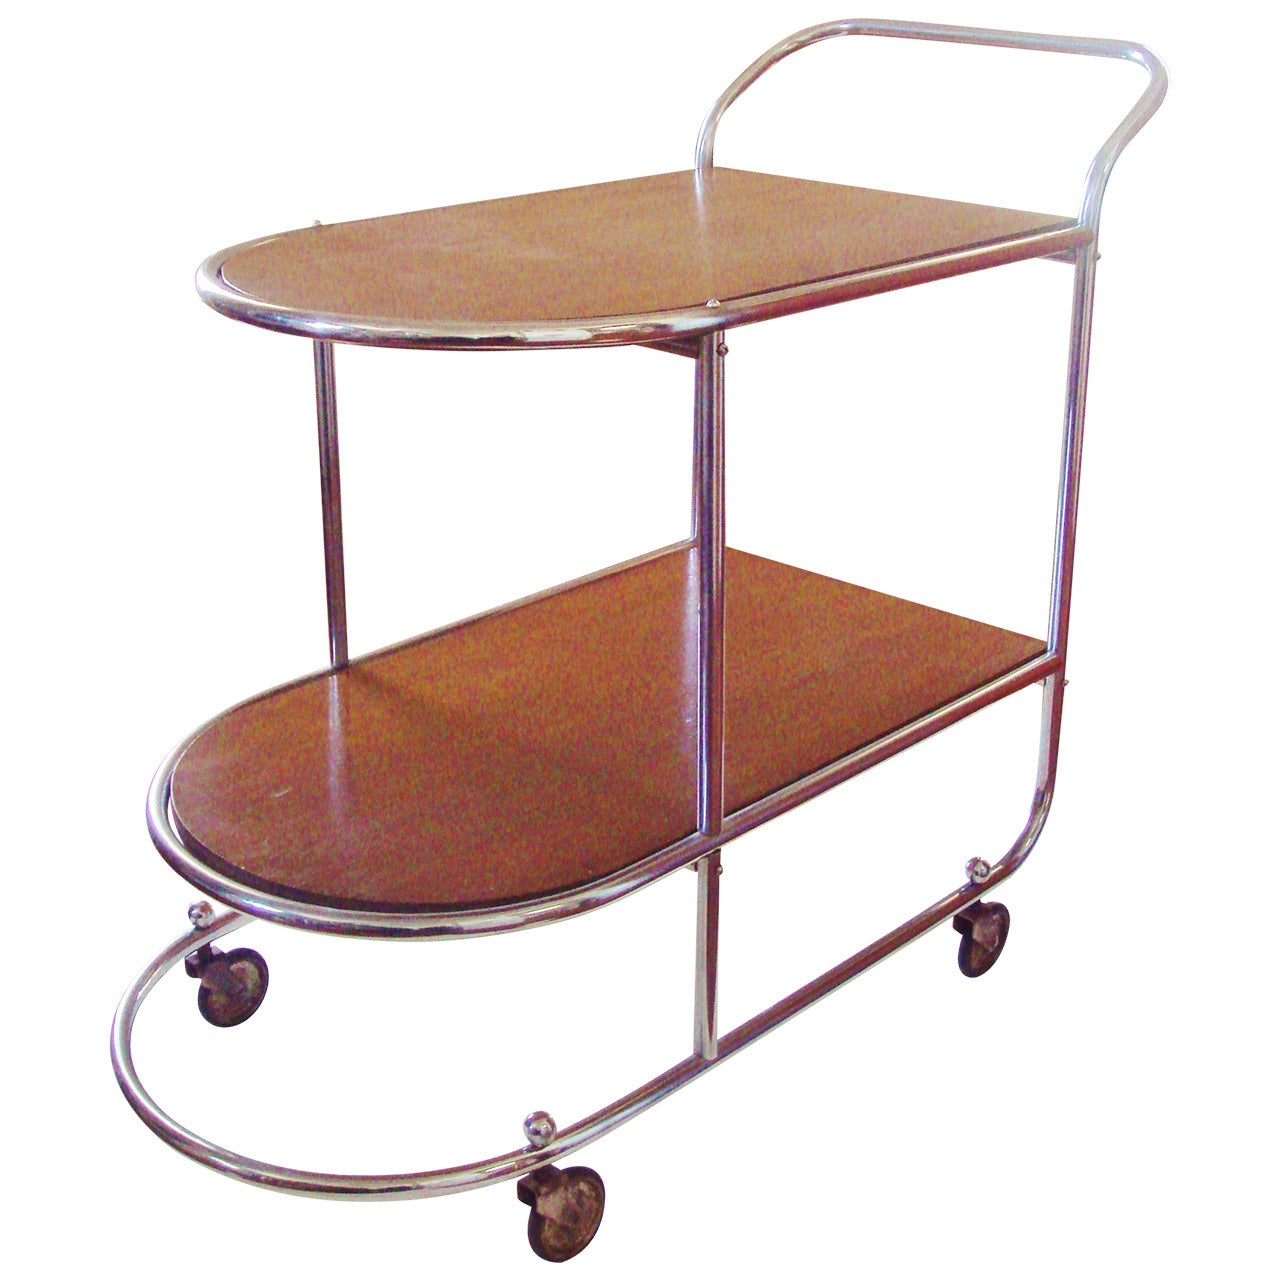 Belgian Art Deco Two-Tier Chrome and Wood Bar Cart